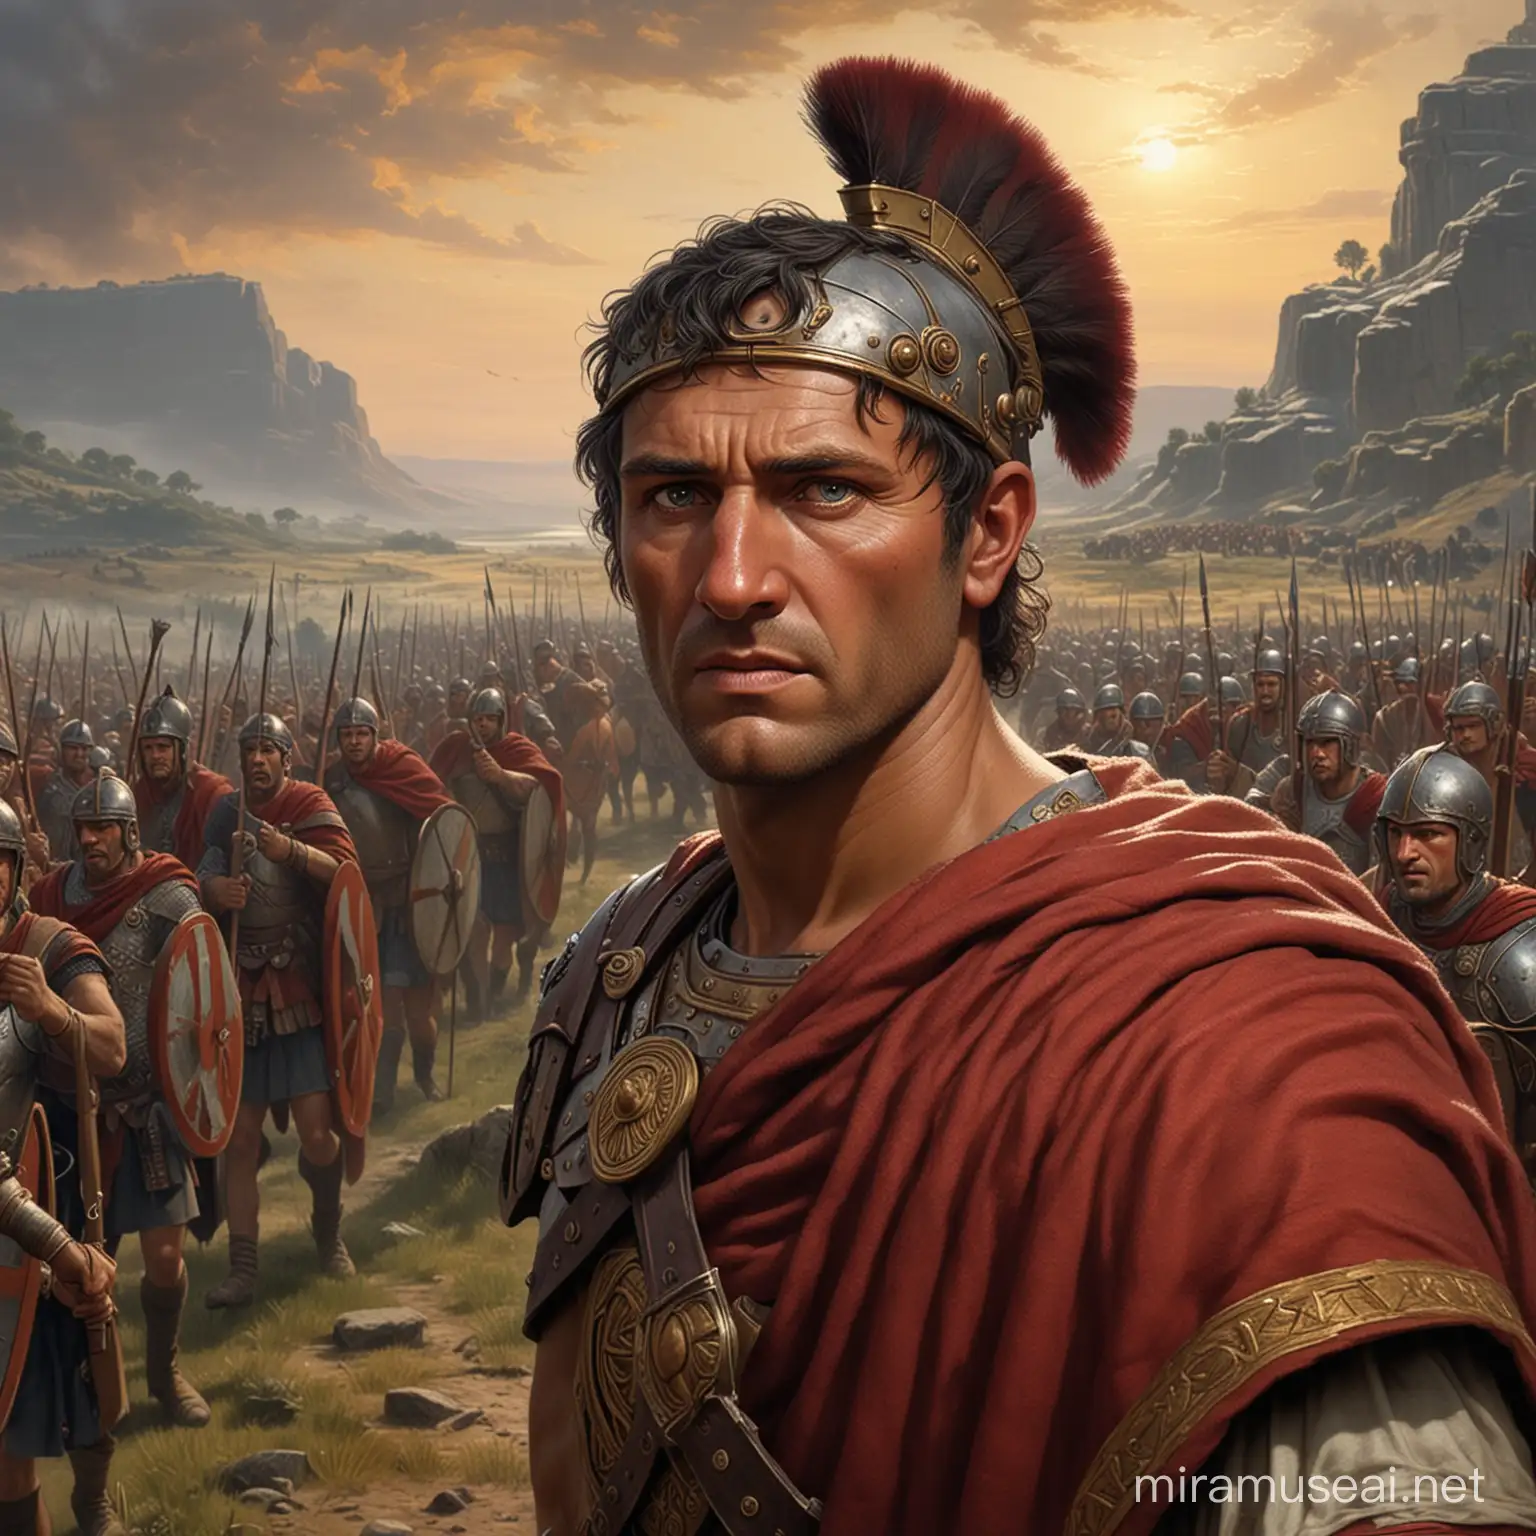 The dawn of Caesar's conquest: a brilliant strategist leading his troops through the rugged terrain of Gaul, his gaze fixed on victory.